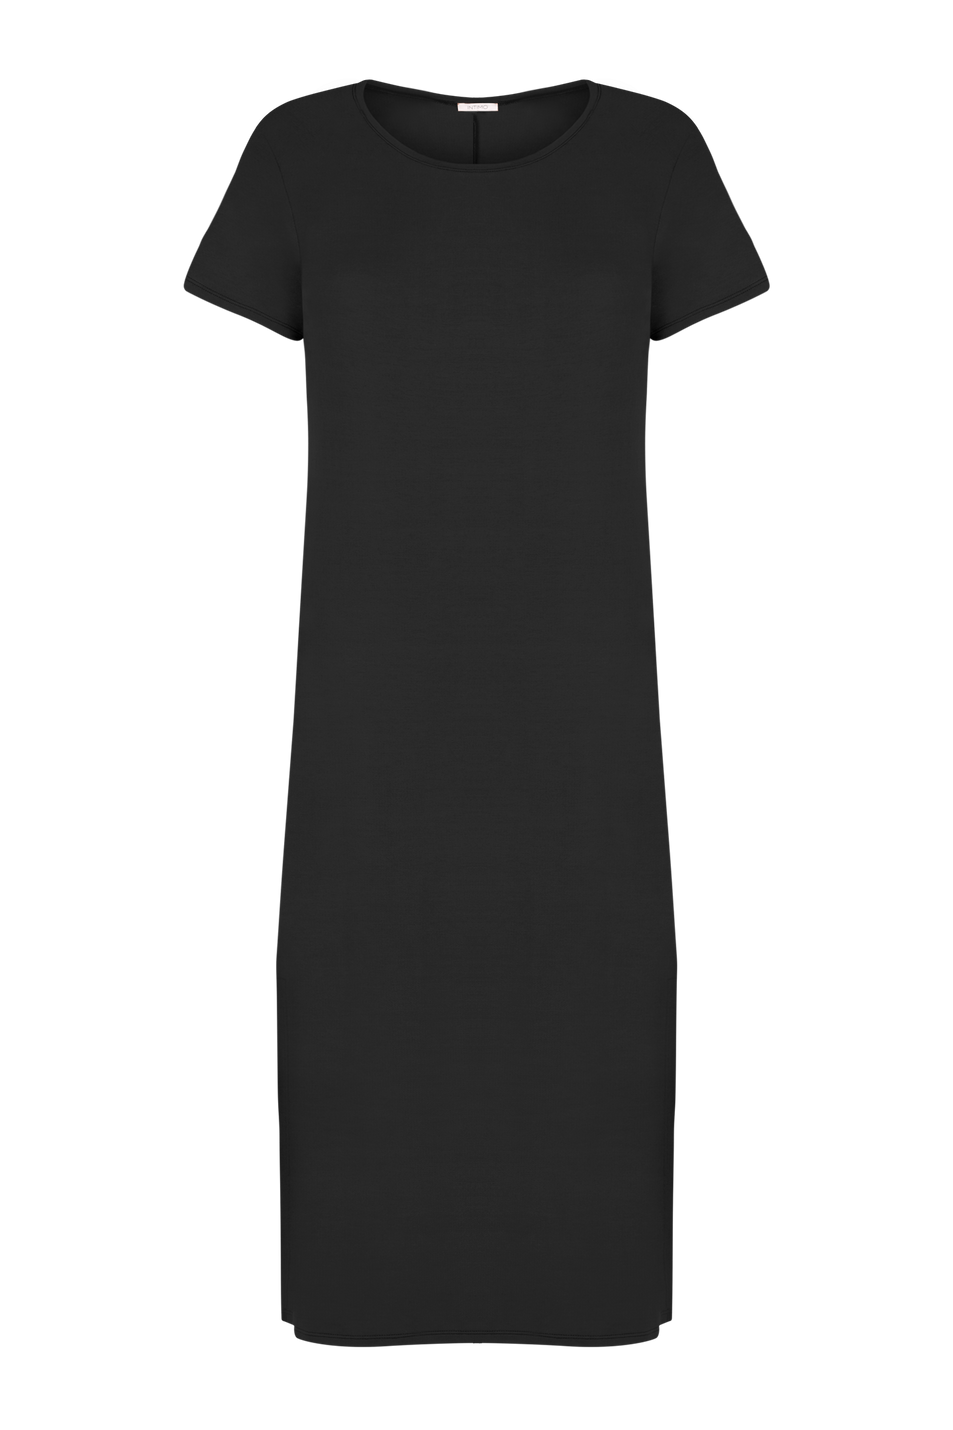 Buy TEE DRESS online at Intimo